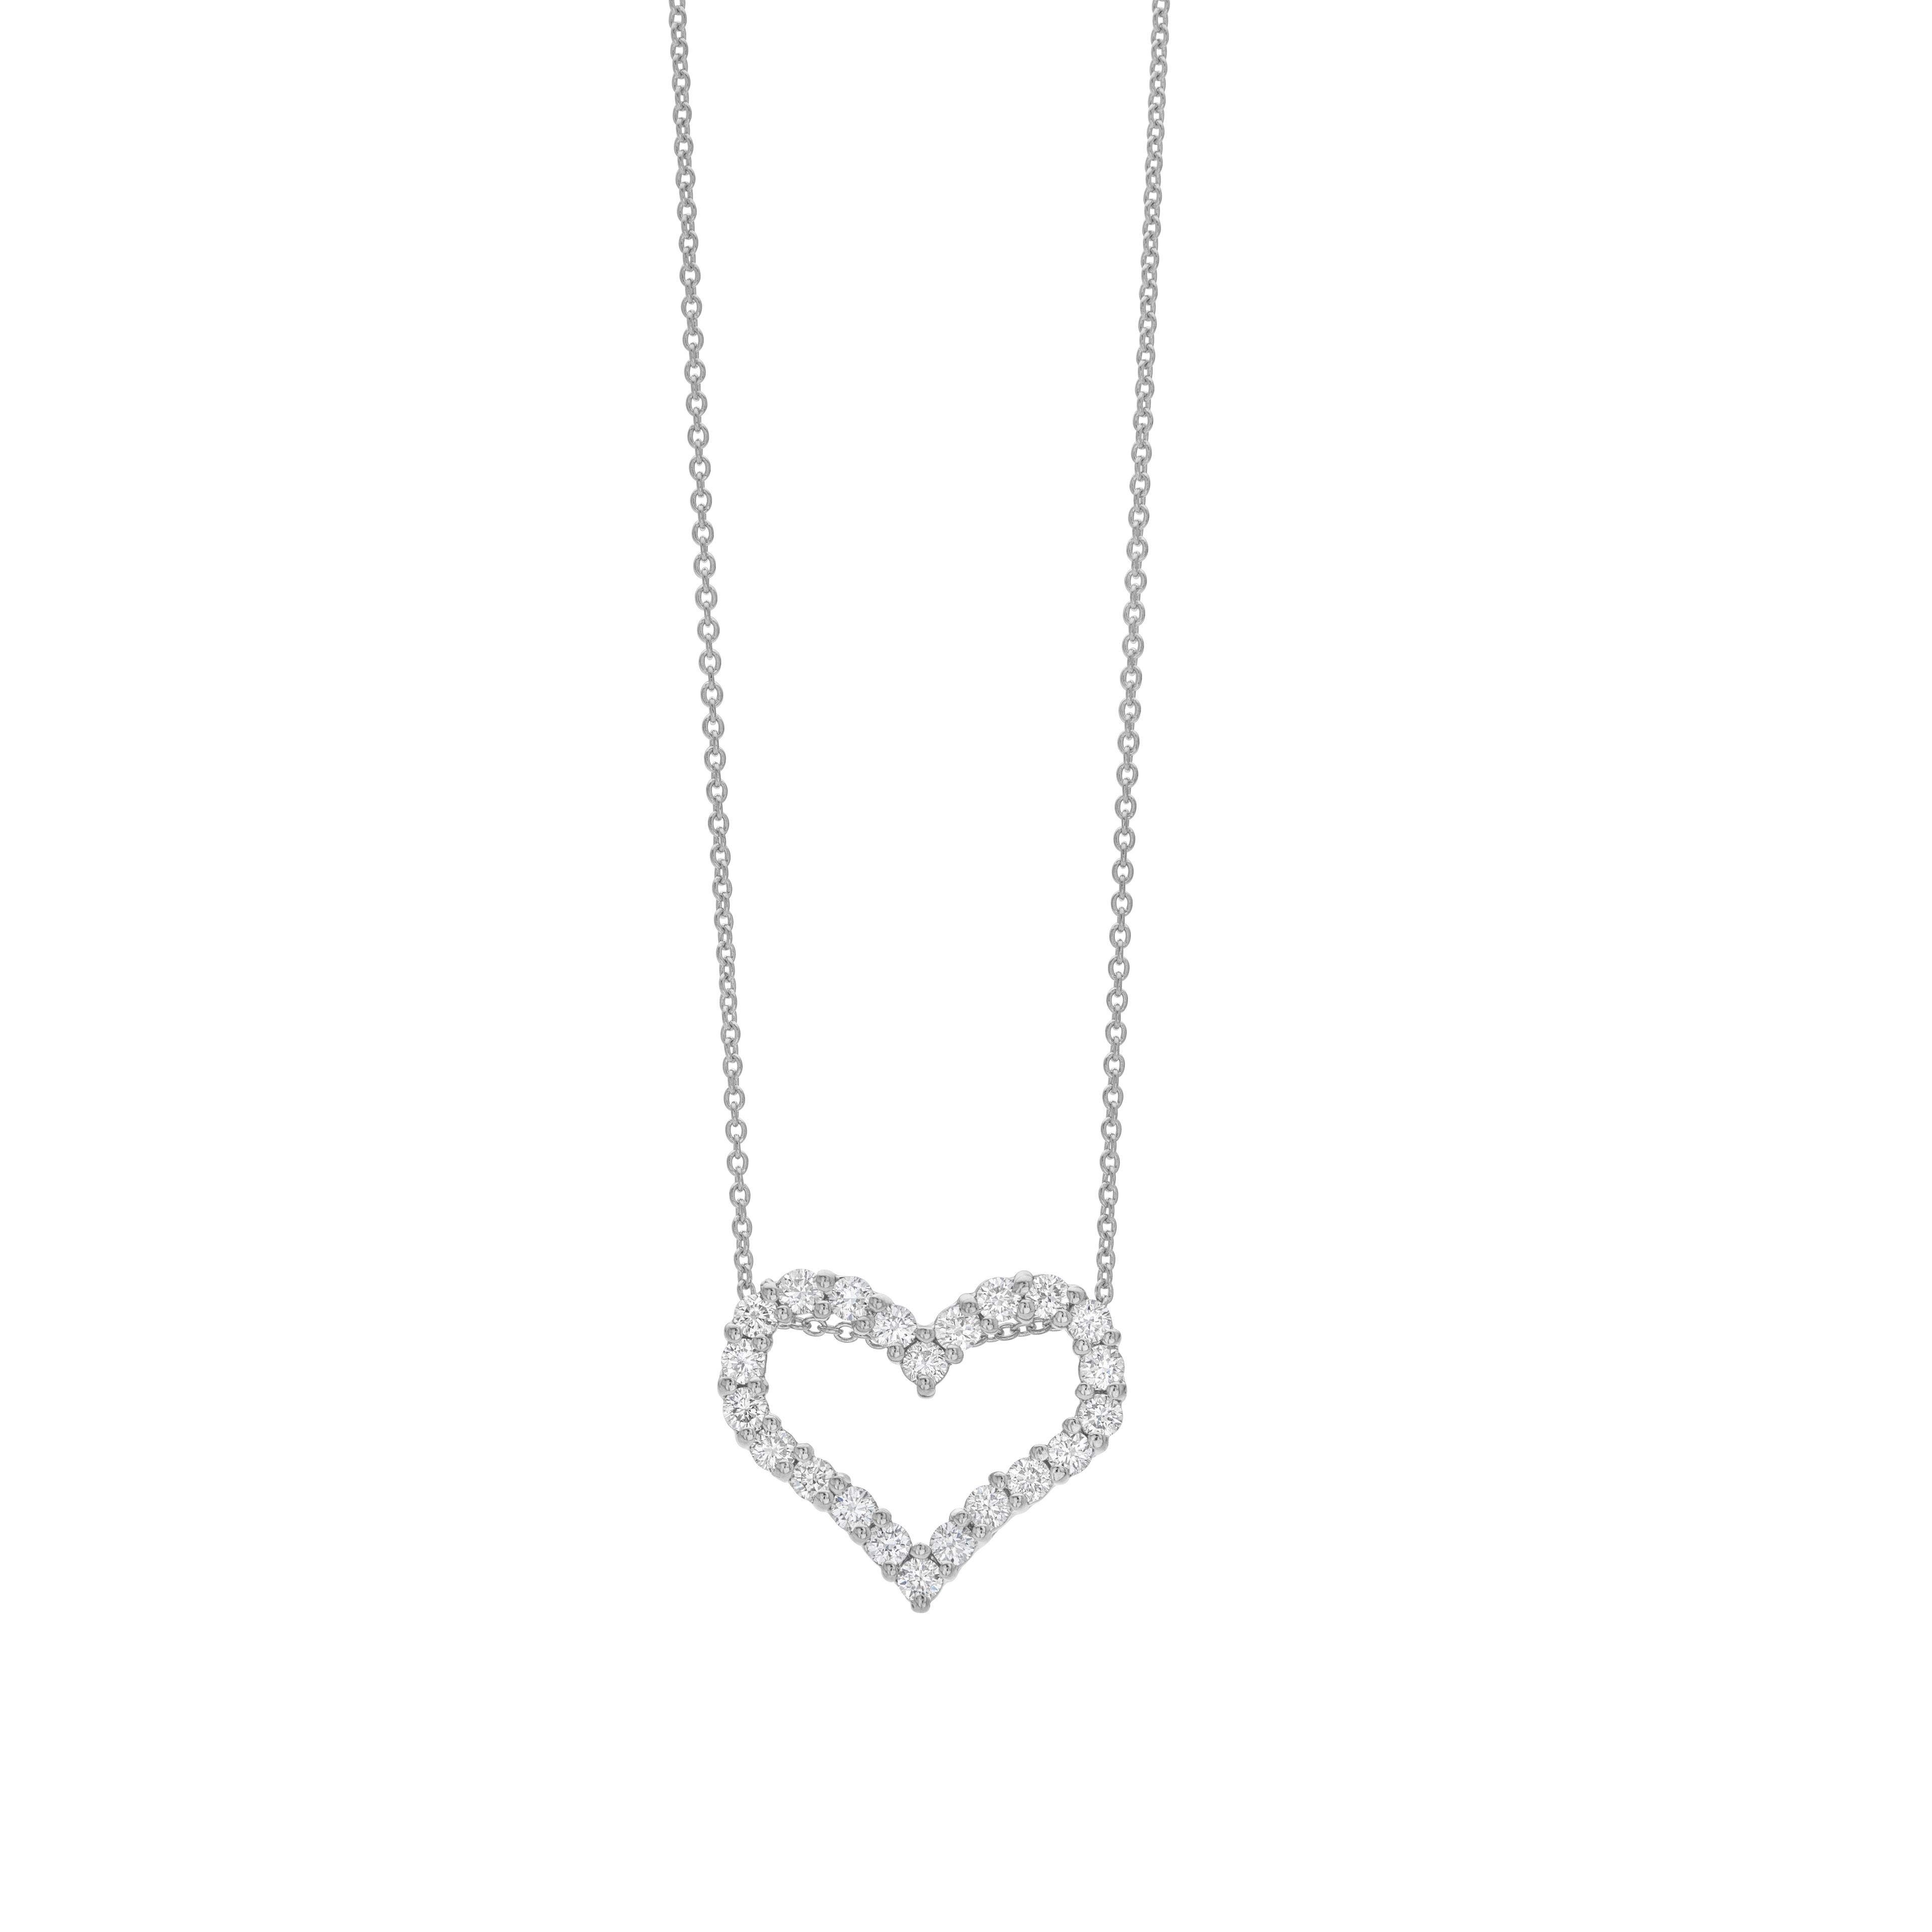 Heart Shaped Diamond Pendant Necklace in White Gold 0